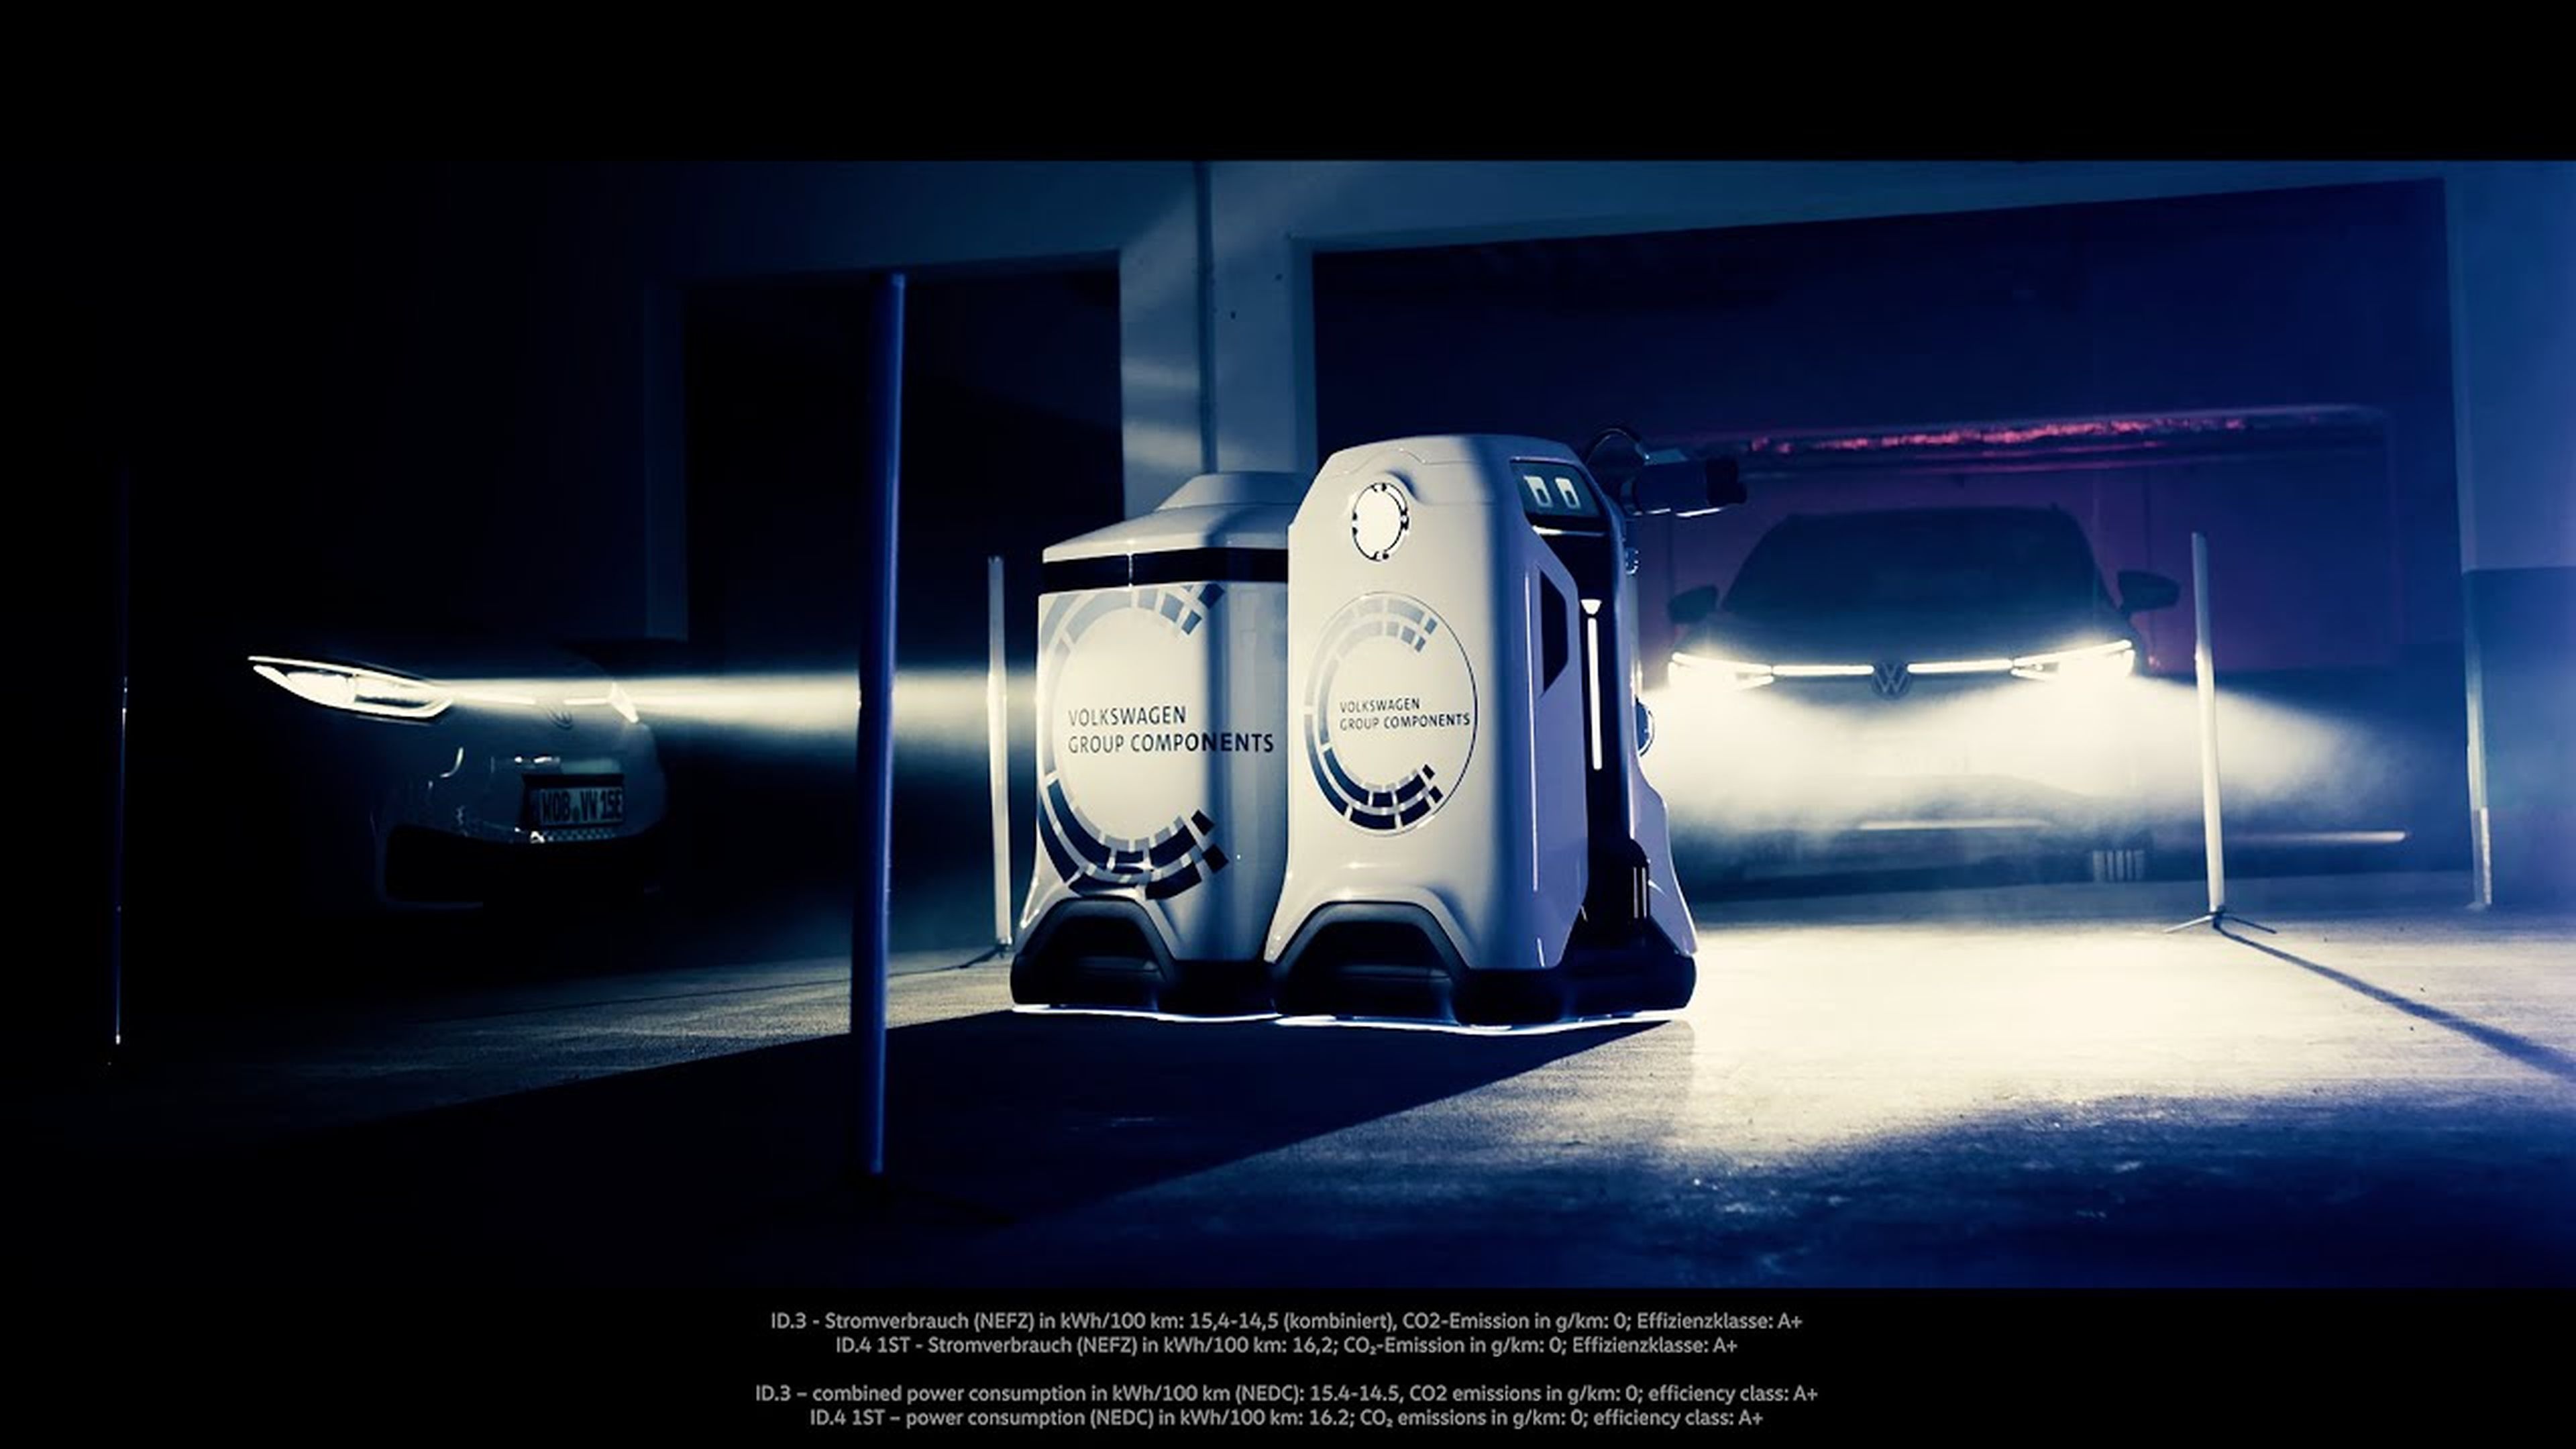 Volkswagens Mobile Charging Robot – vision becomes reality